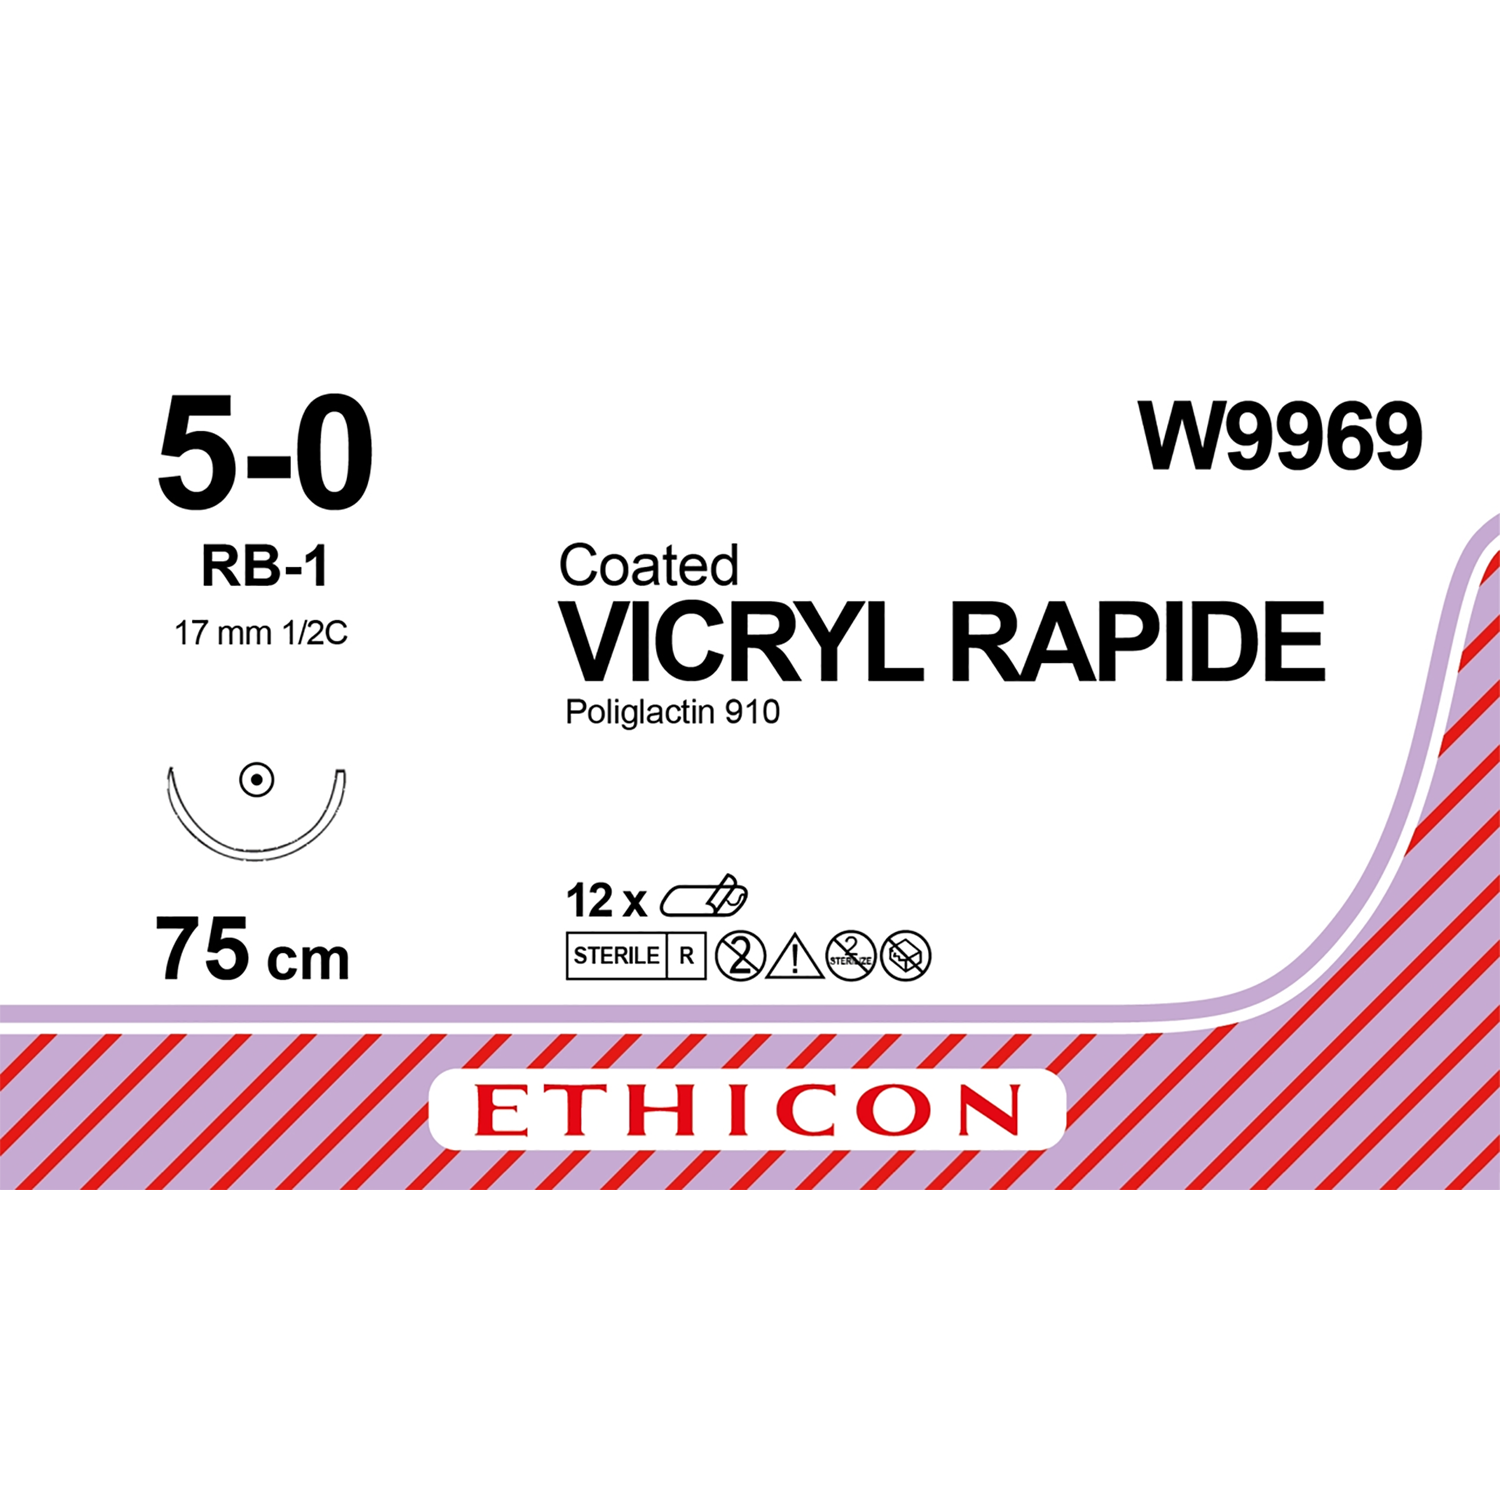 Ethicon Vicryl Rapide Suture | Absorbable | Undyed | Size: 5-0 | Length: 75cm | Needle: RB-1 | Pack of 12